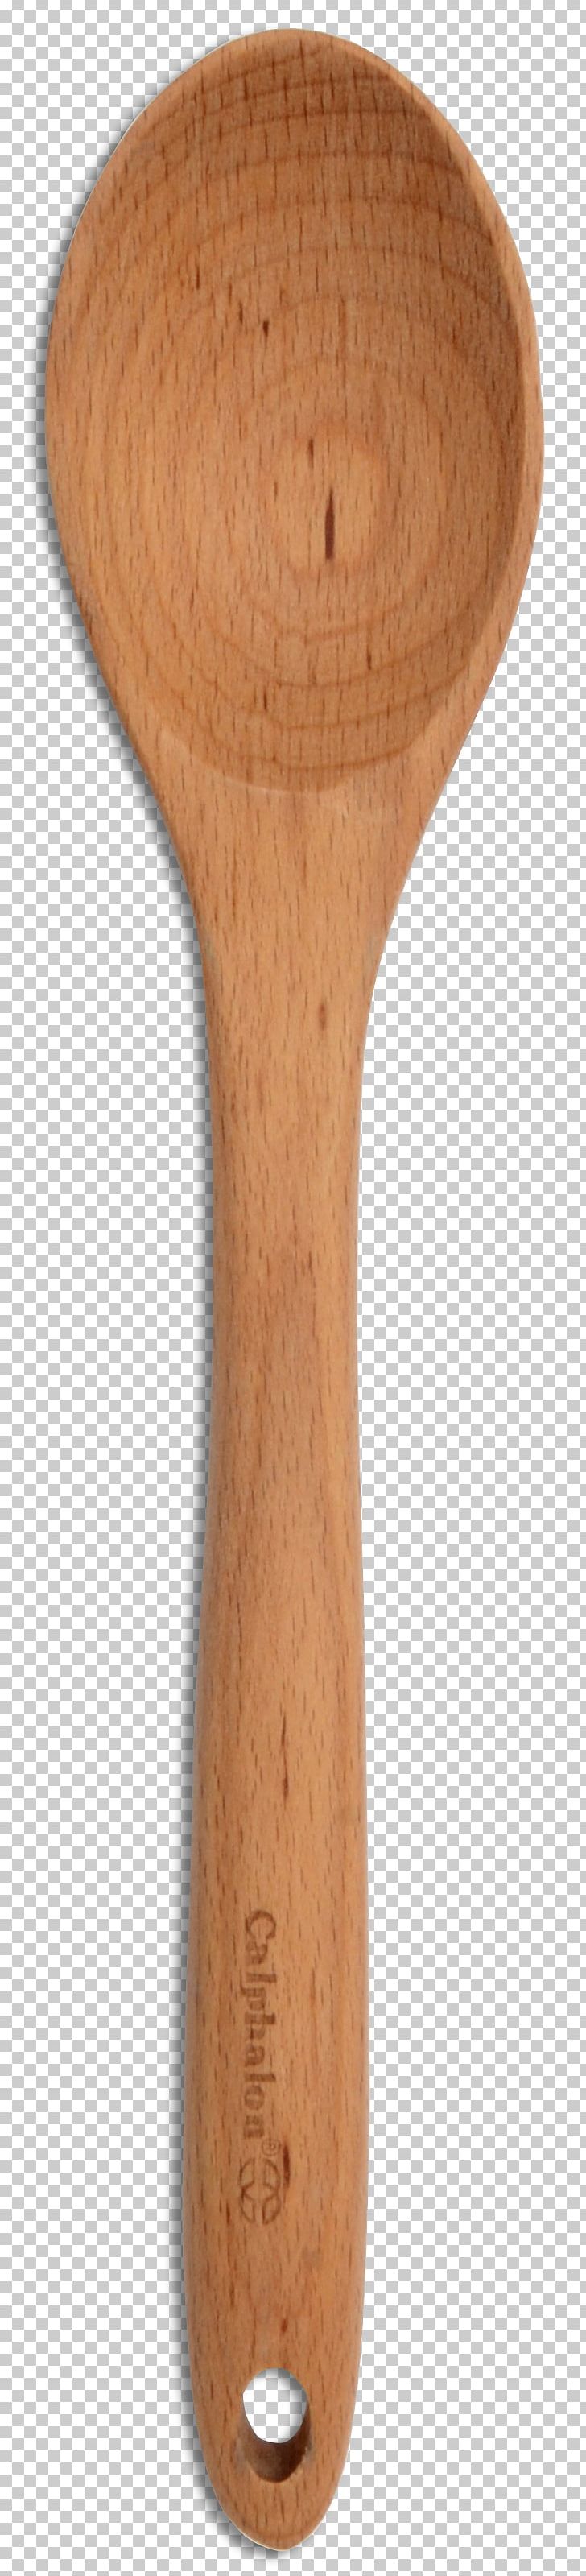 Wooden Spoon Ladle PNG, Clipart, Cutlery, Fork, Kitchen Utensil, Ladle, Slotted Spoons Free PNG Download